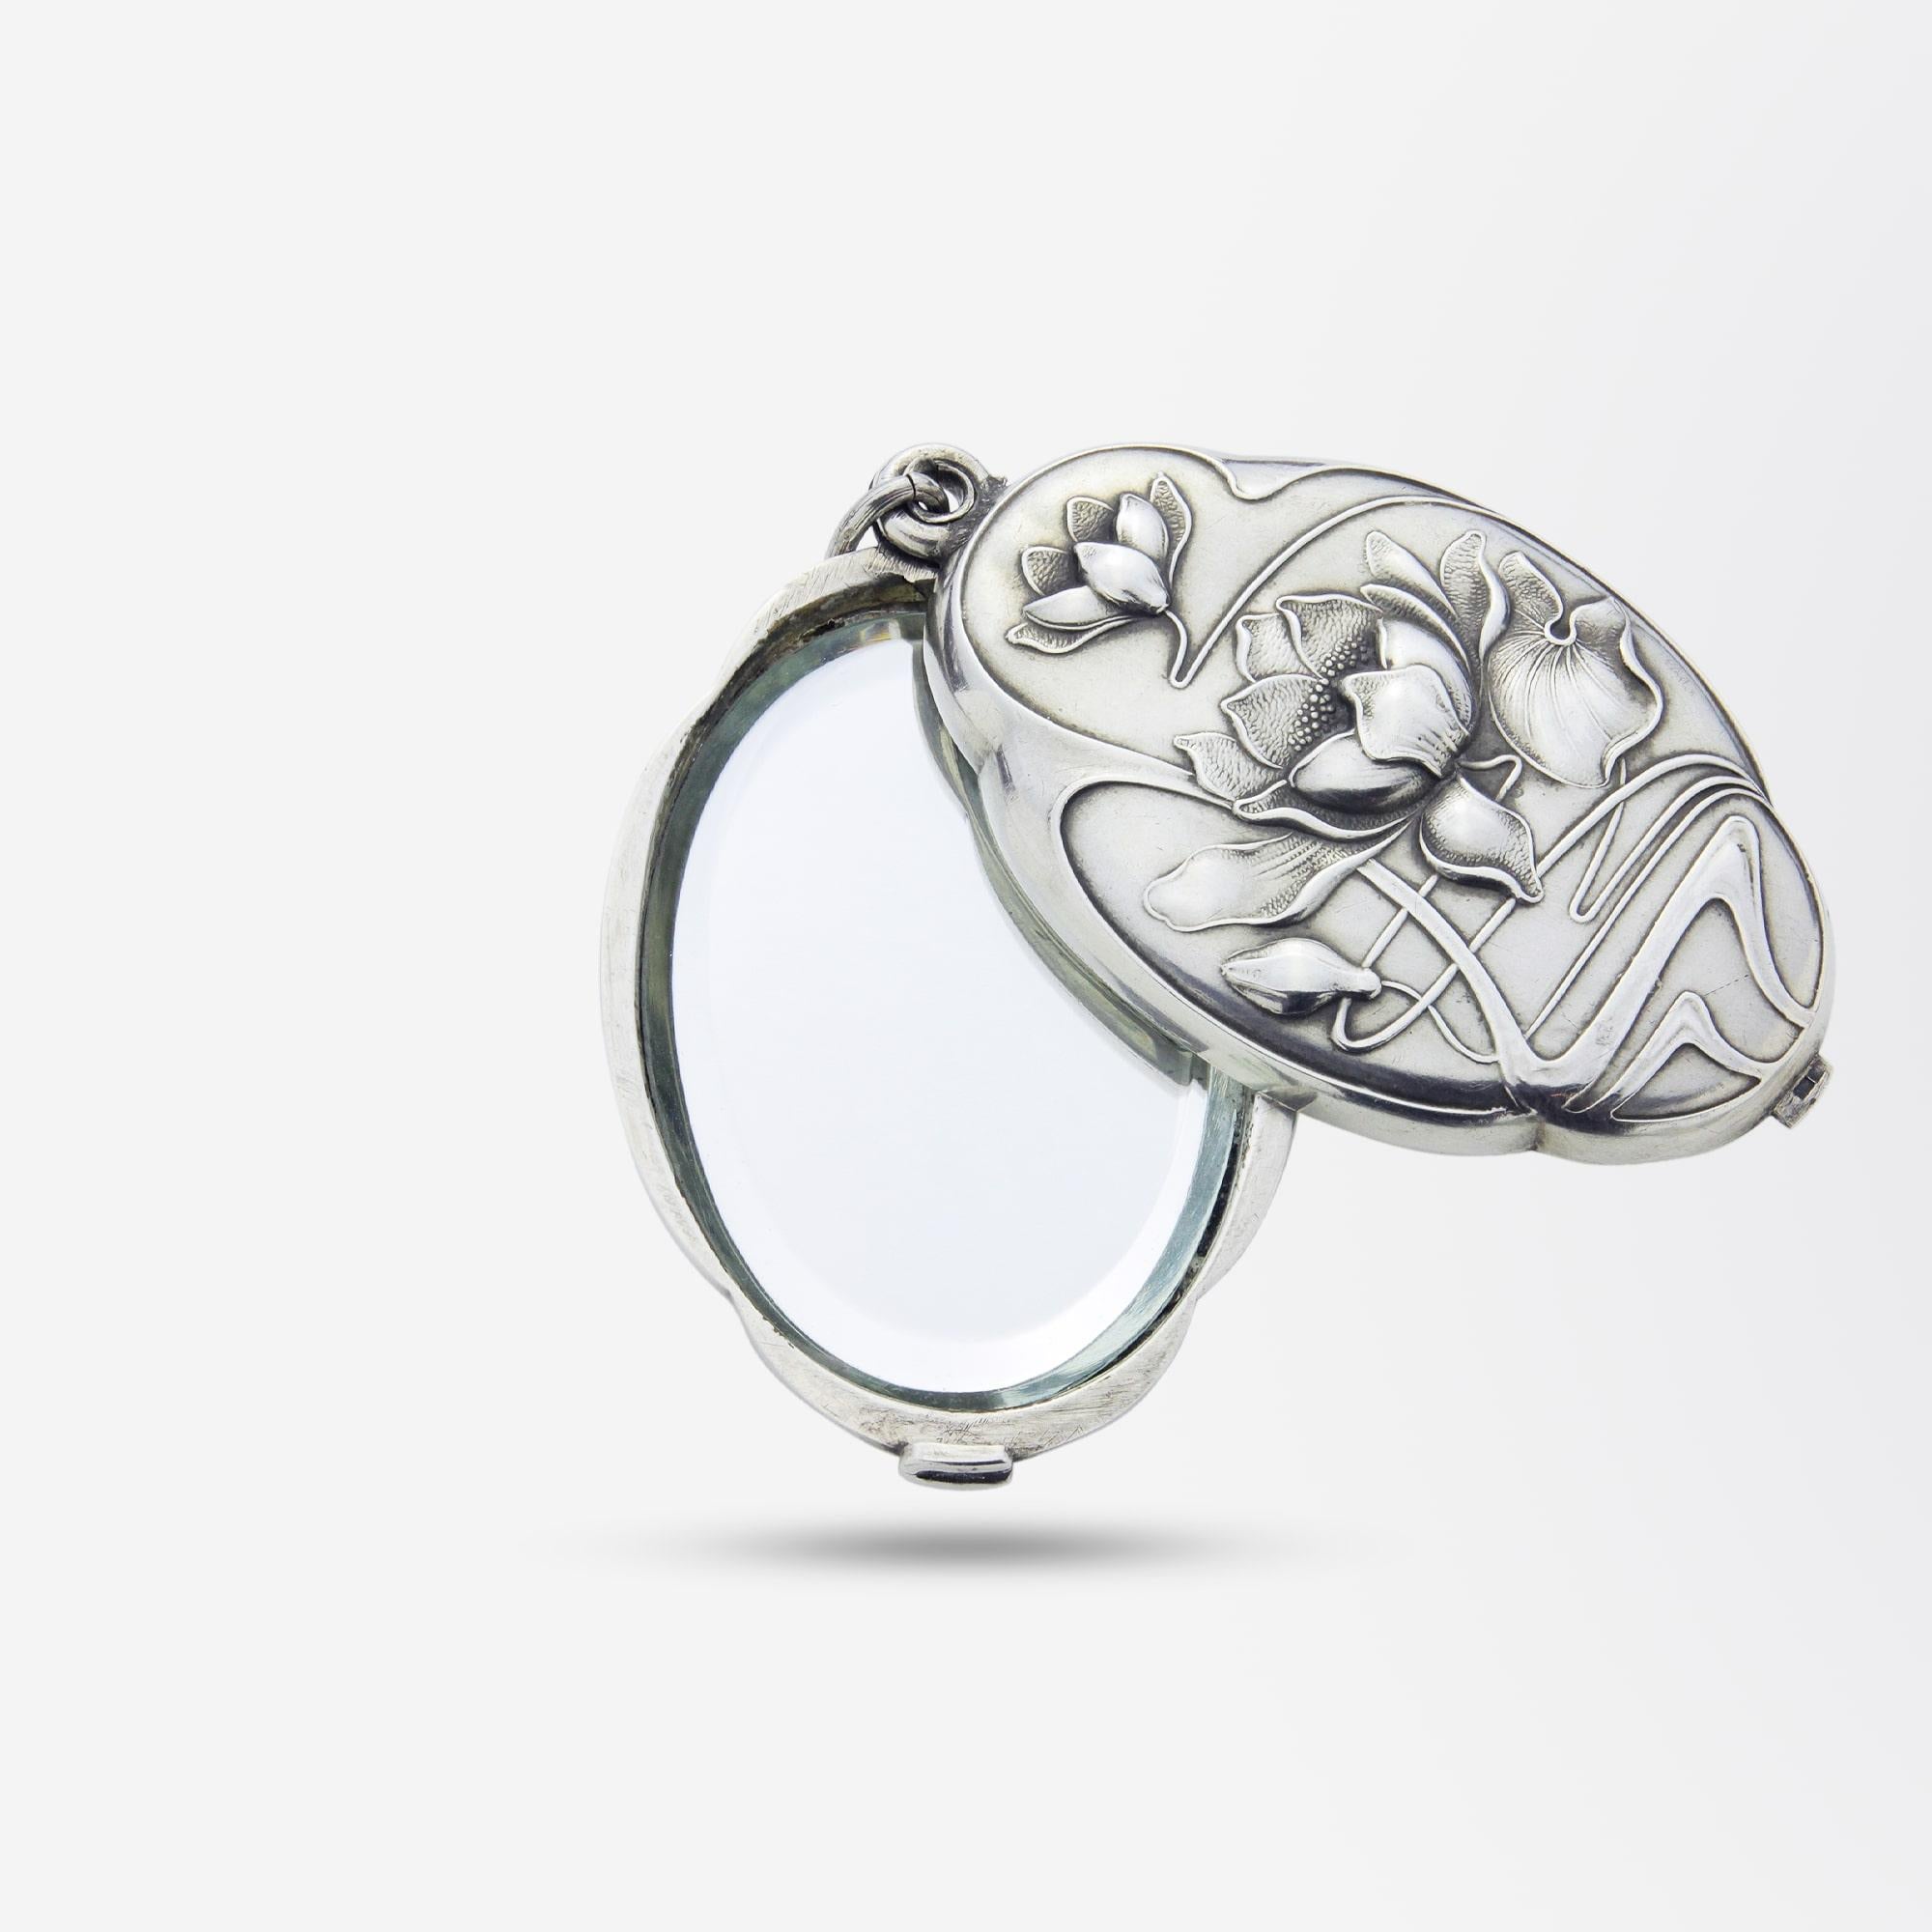 An Art Nouveau silver pendant decorated with water lilies, likely French. The pendant slides open to reveal a pair of oval mirrors to the interior. The mirrored interior is likely a later addition, with the piece most probably originally a locket